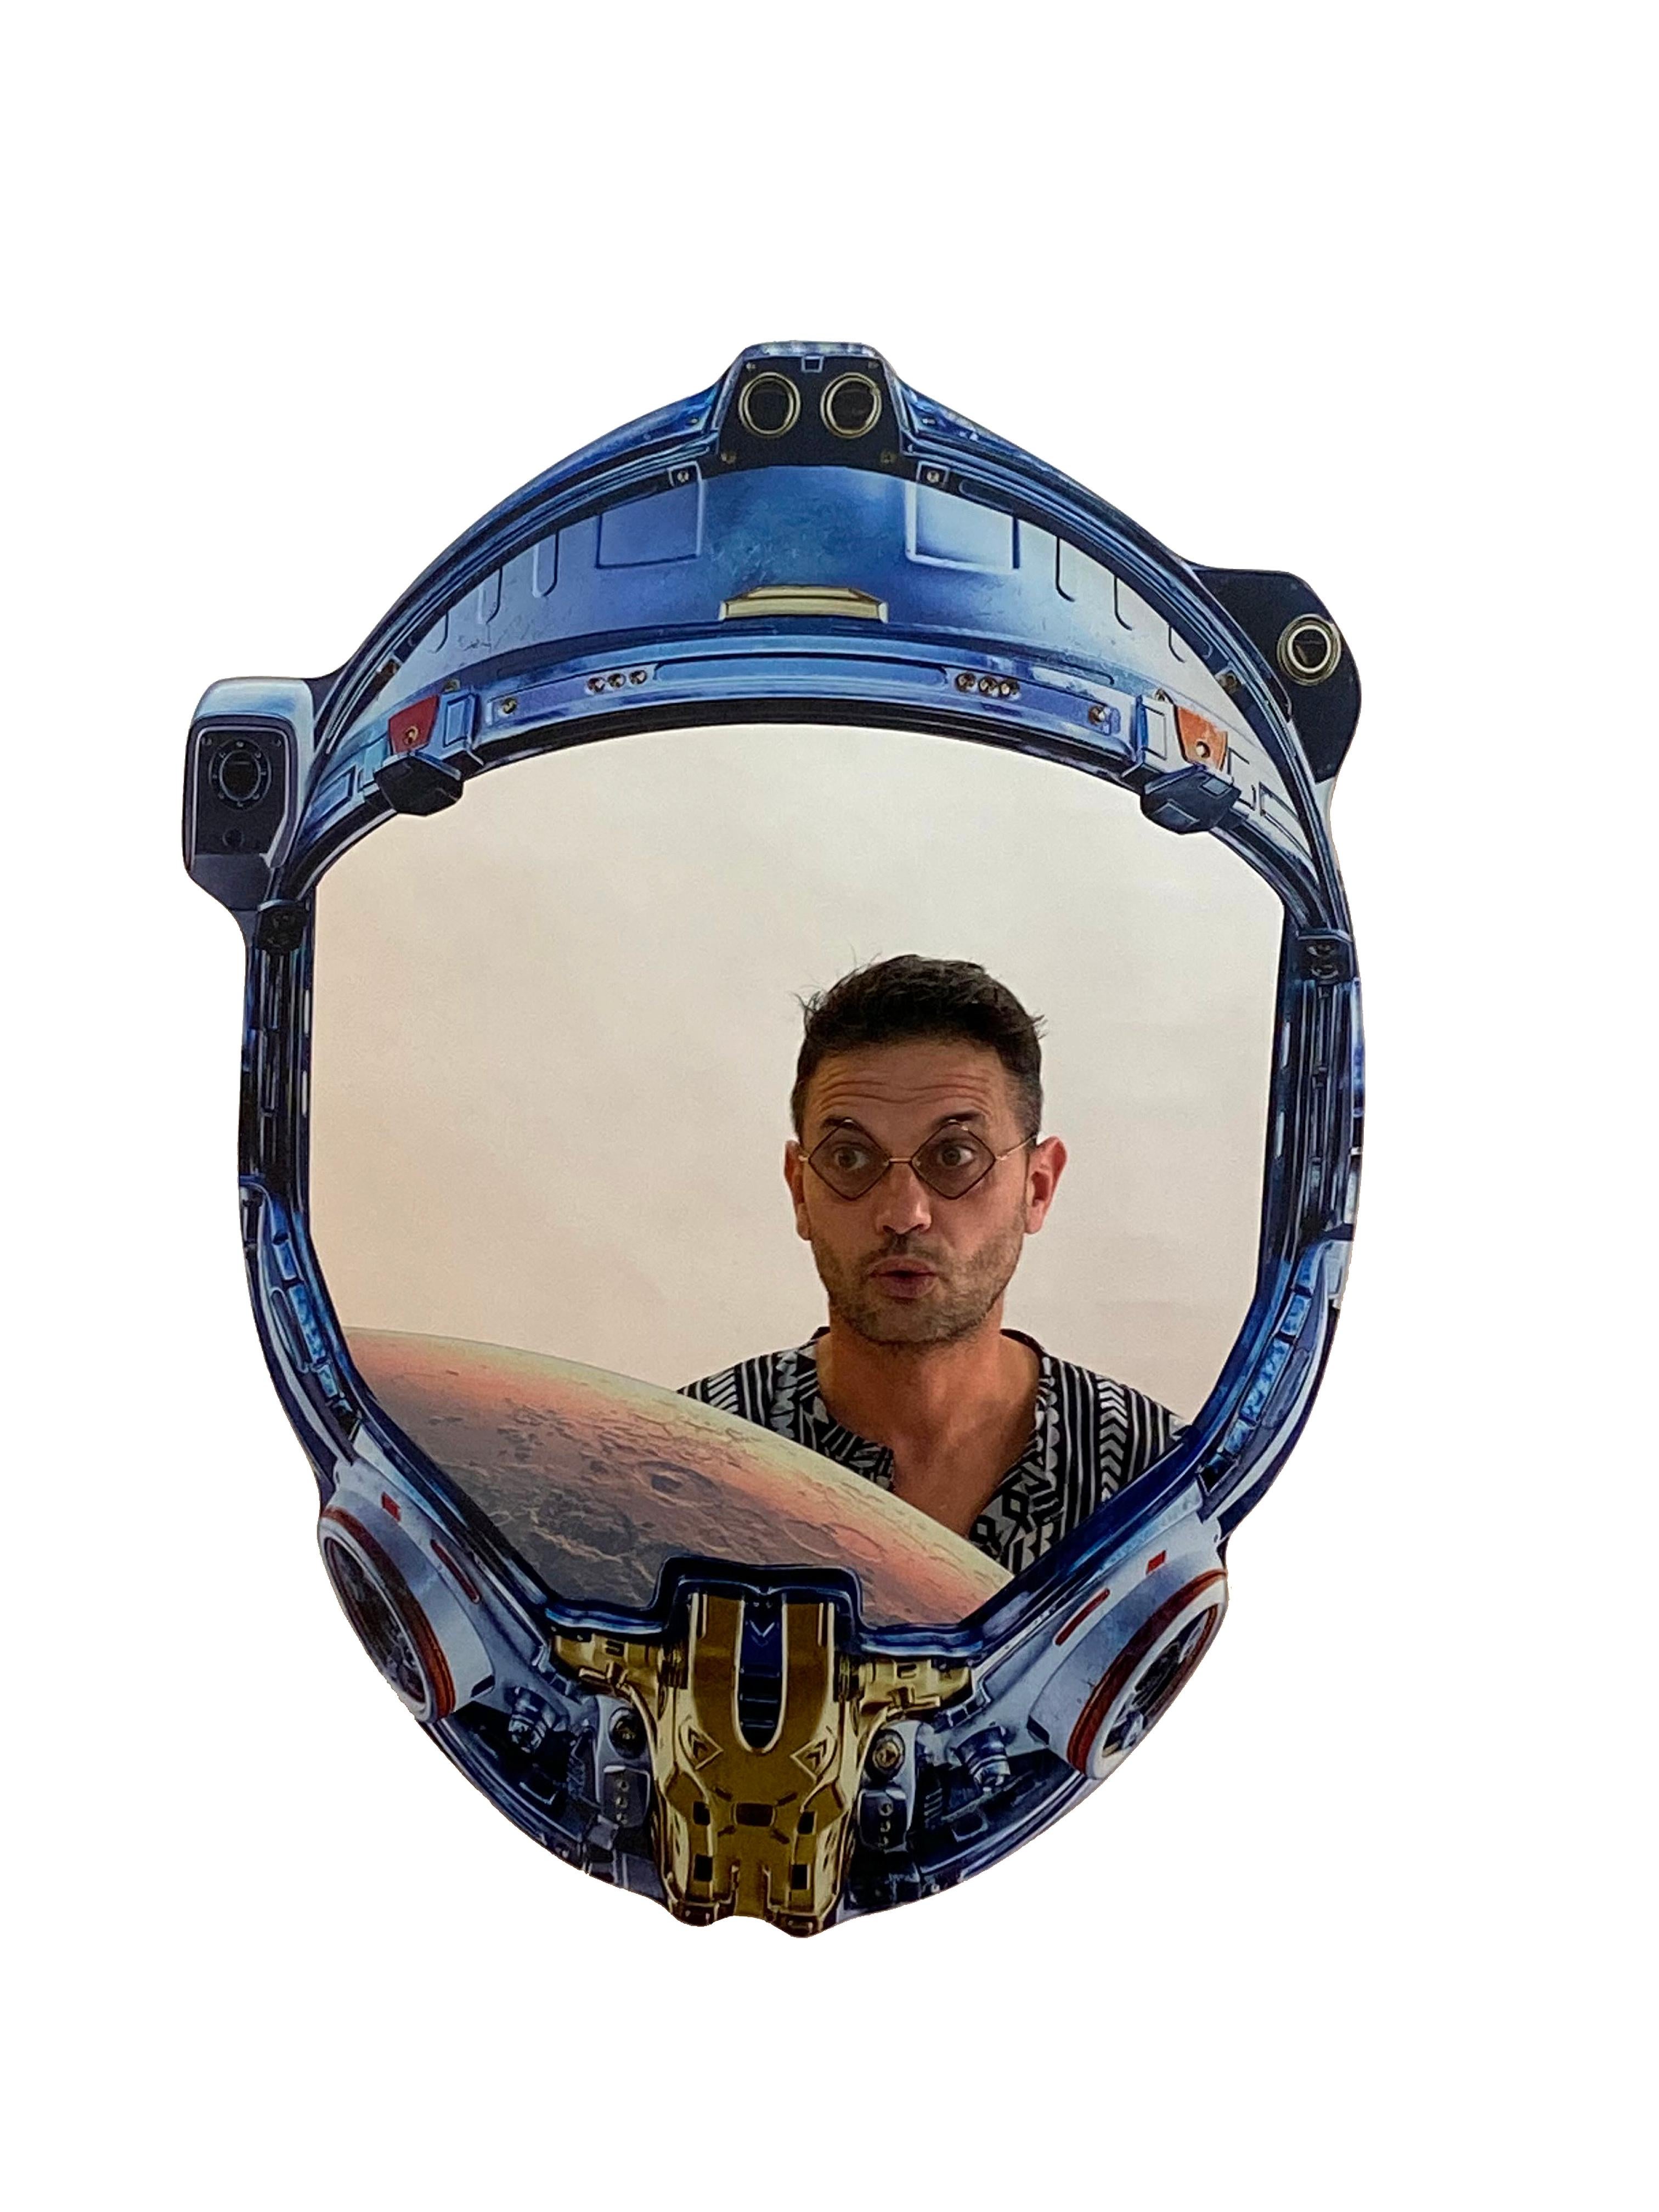 Italian Space Cowboy N°9/30, Contemporary Wall Mirror with Printed Astronaut Helmet For Sale